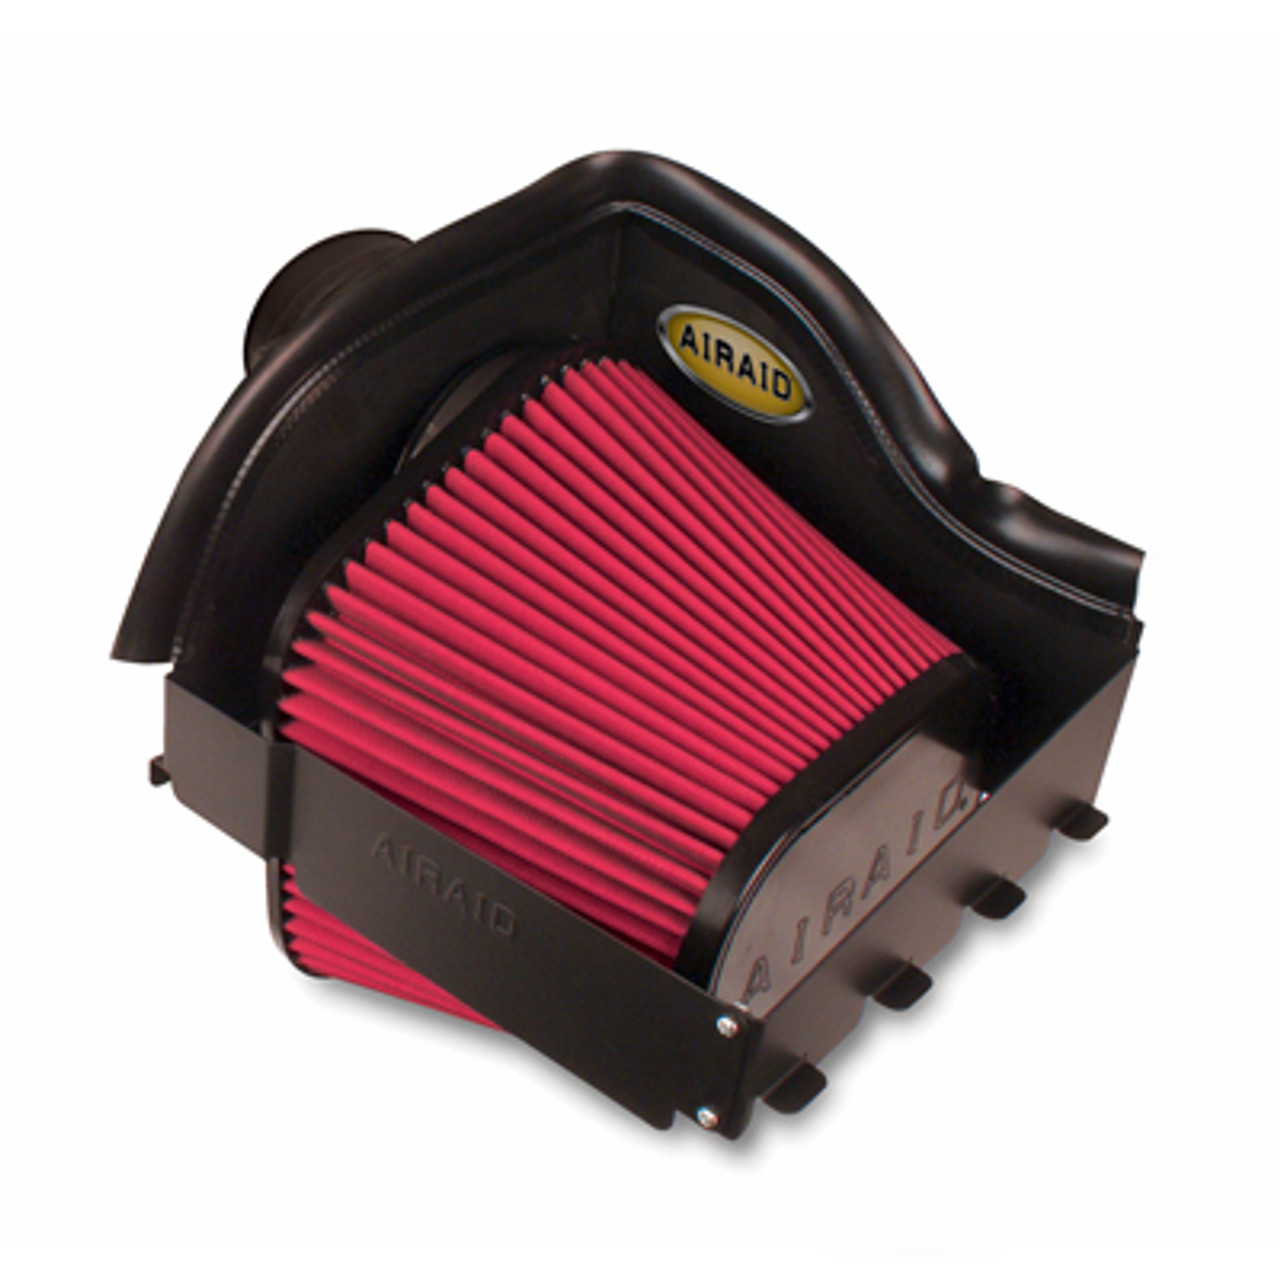 Airaid Cold Air Intake System: Increased Horsepower, Superior Filtration: C 